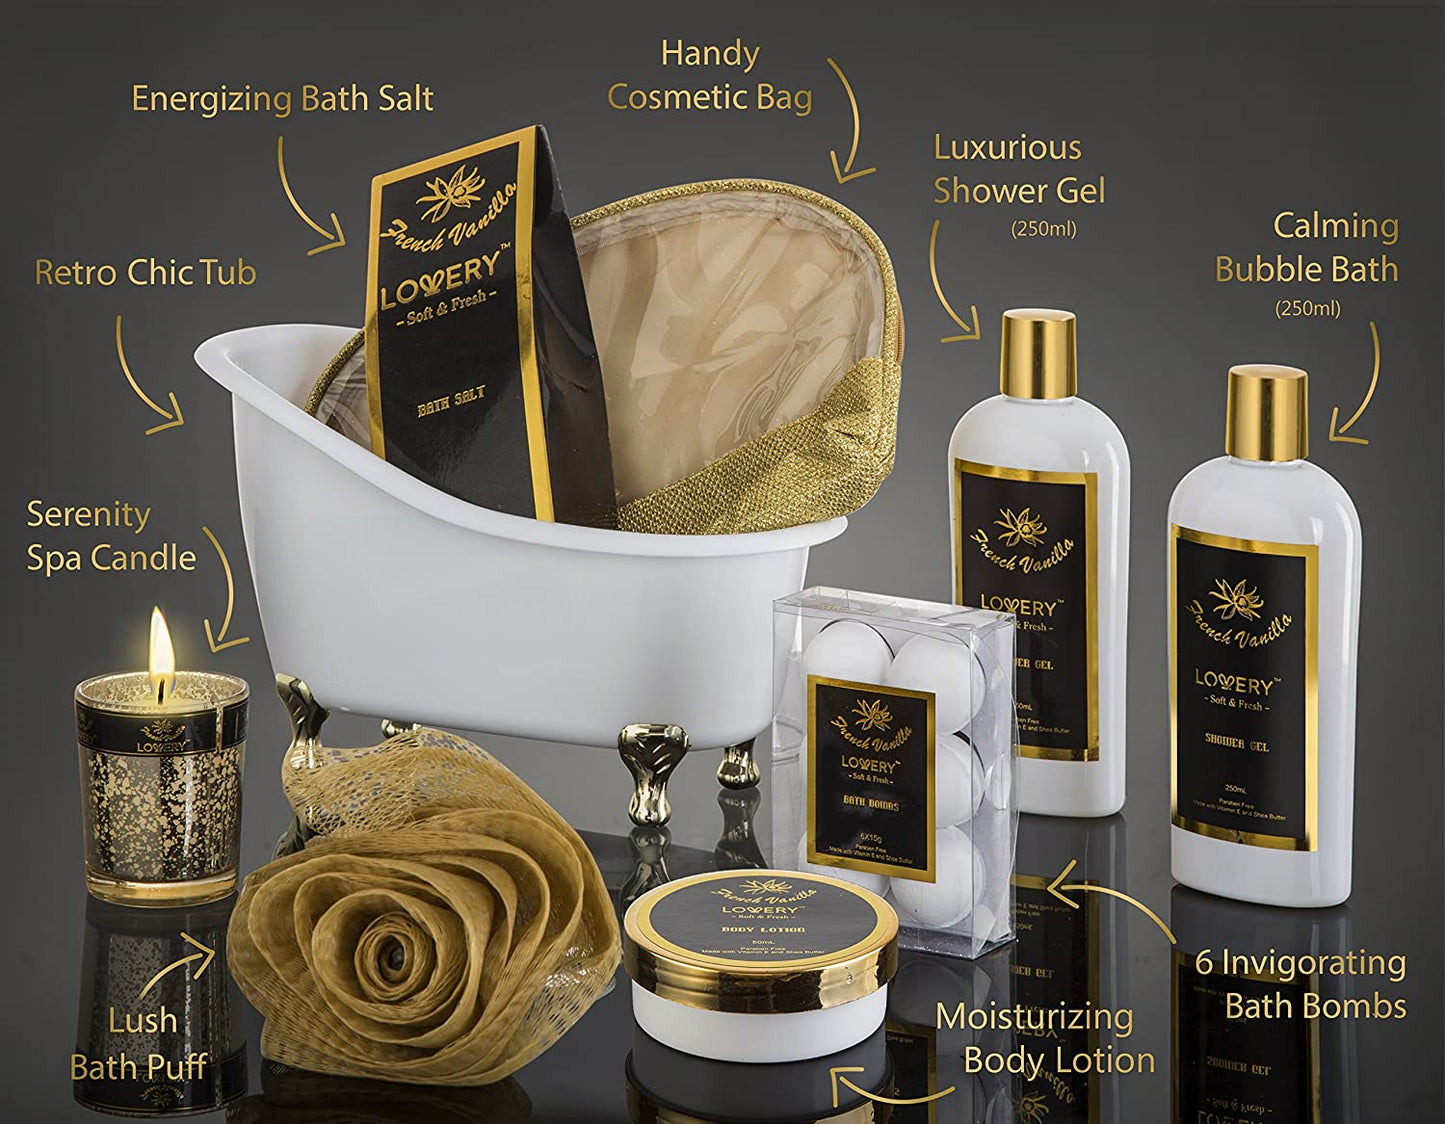 Lovery French Vanilla bath gift set, elegantly packaged body care essentials, Luxurious Black & Gold Design, Soft & Fresh Aroma Products, Premium Bath Bombs and Body Lotion, Decorative Gold Ribbon Detailing, Exquisite Bathing Experience Enhancer, Ideal for Spa-Like Relaxation, Paraben-Free Bath Essentials, Cruelty-Free Body Care Selection, Presented in a Sophisticated White Tub with Gold Accents